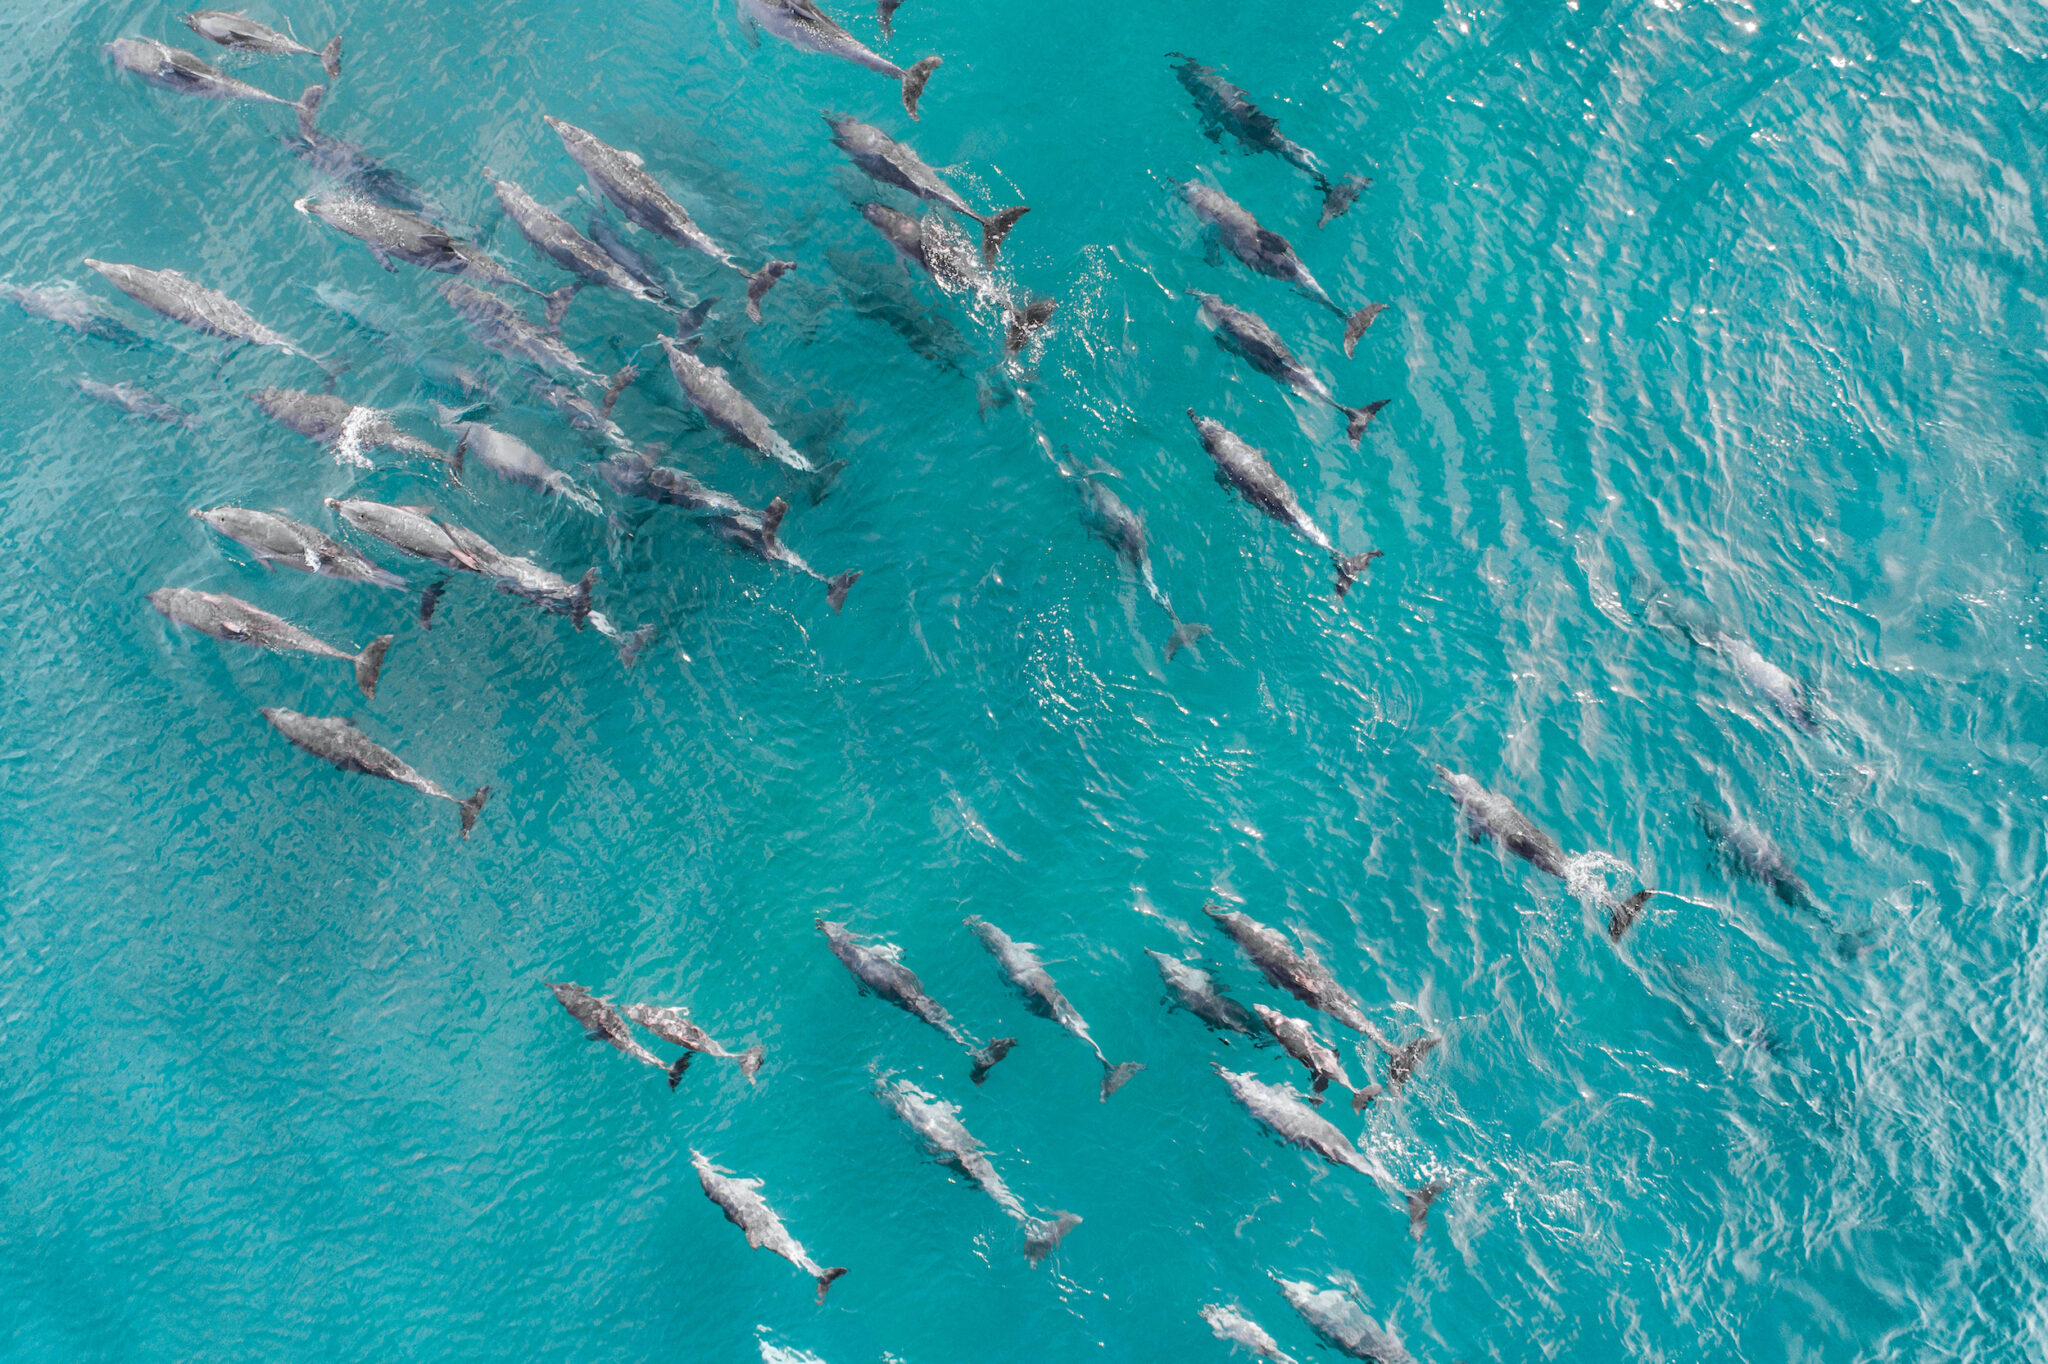 Dolphins are very social, living in groups that hunt and even play together. Large pods of dolphins can have 1,000 members or more.